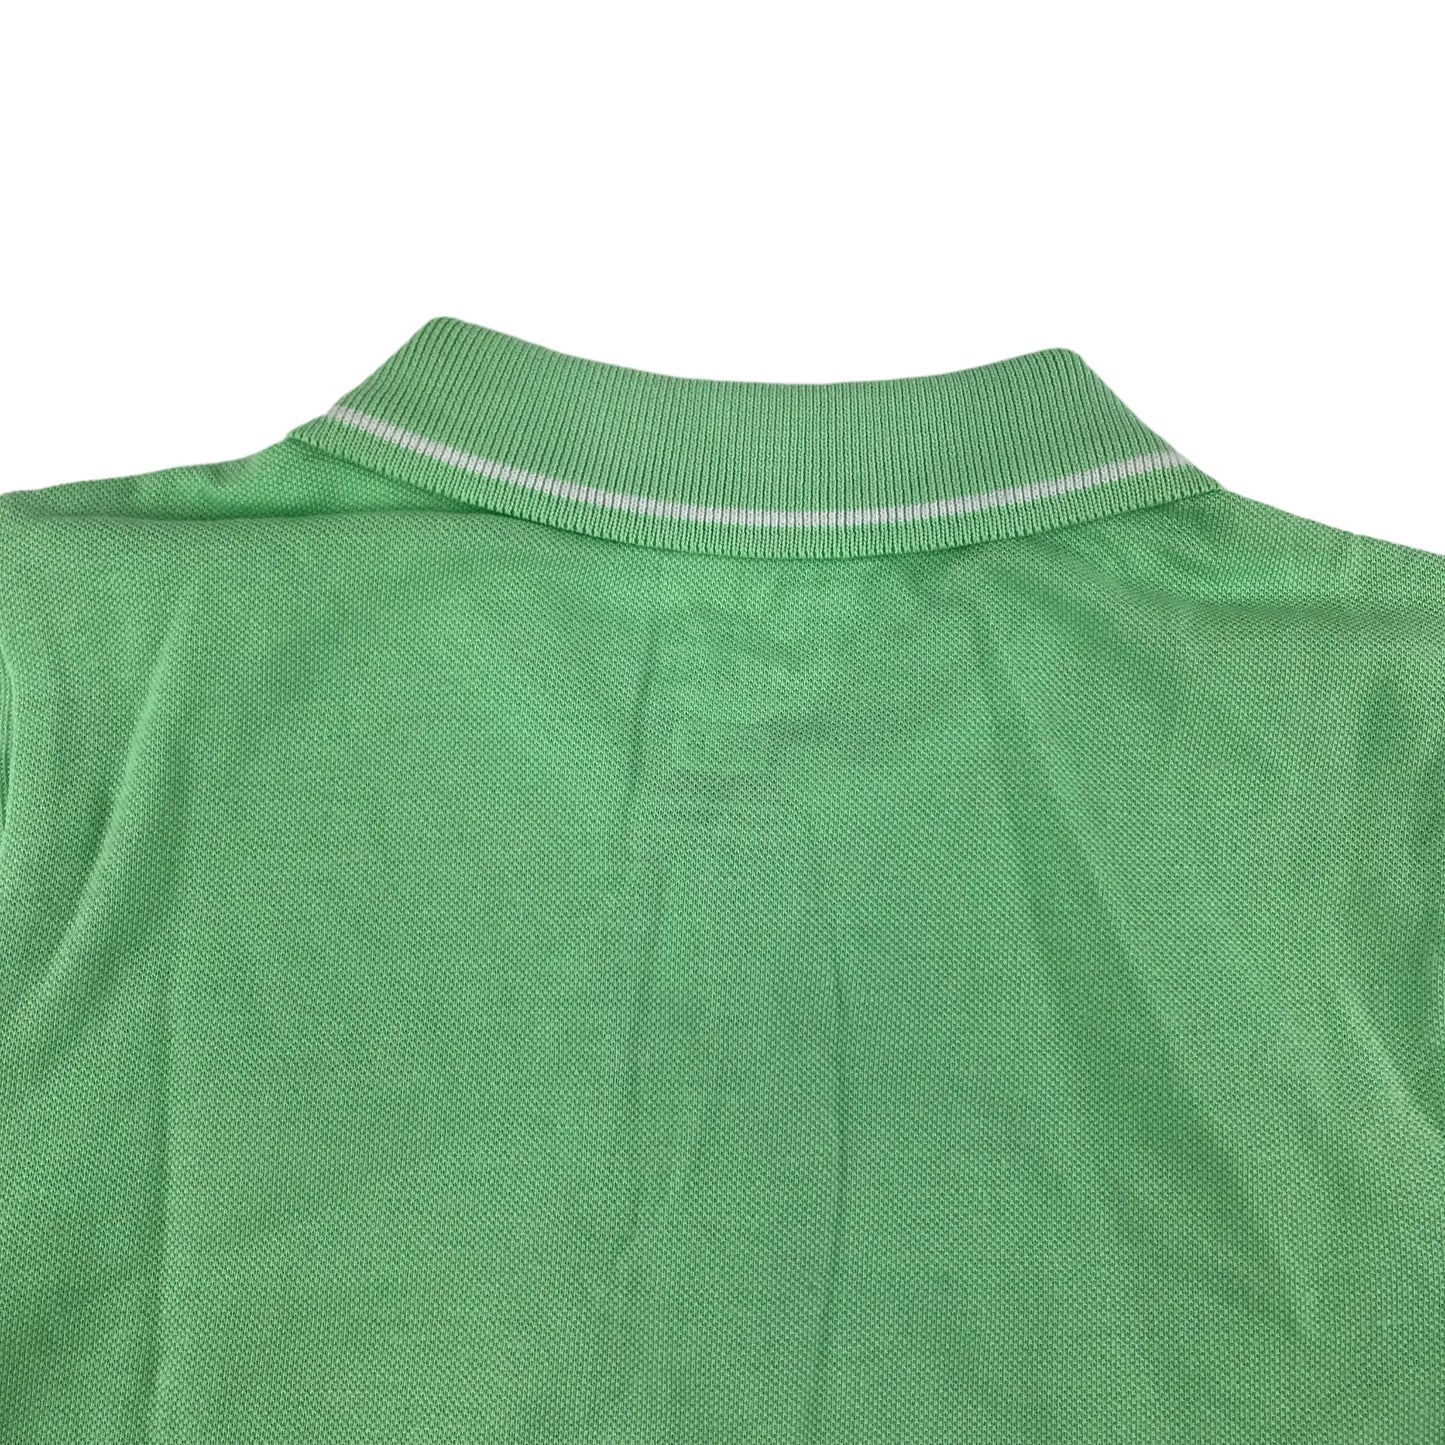 F&F Polo Shirt Age 5 Light Green Short Sleeve Button Up Neck